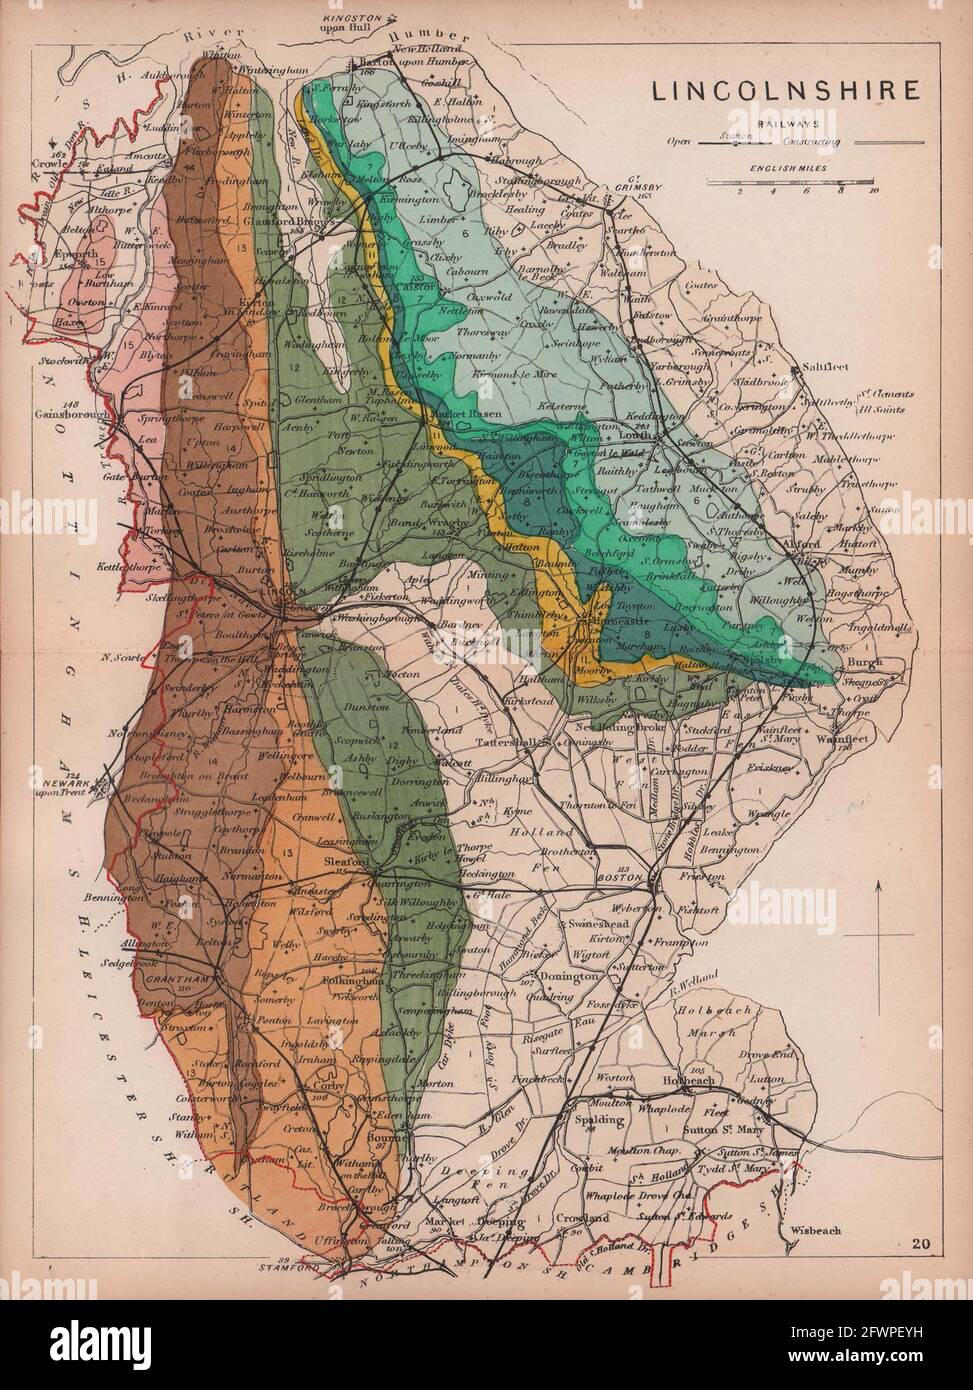 LINCOLNSHIRE antique geological county map by James Reynolds 1864 Stock Photo